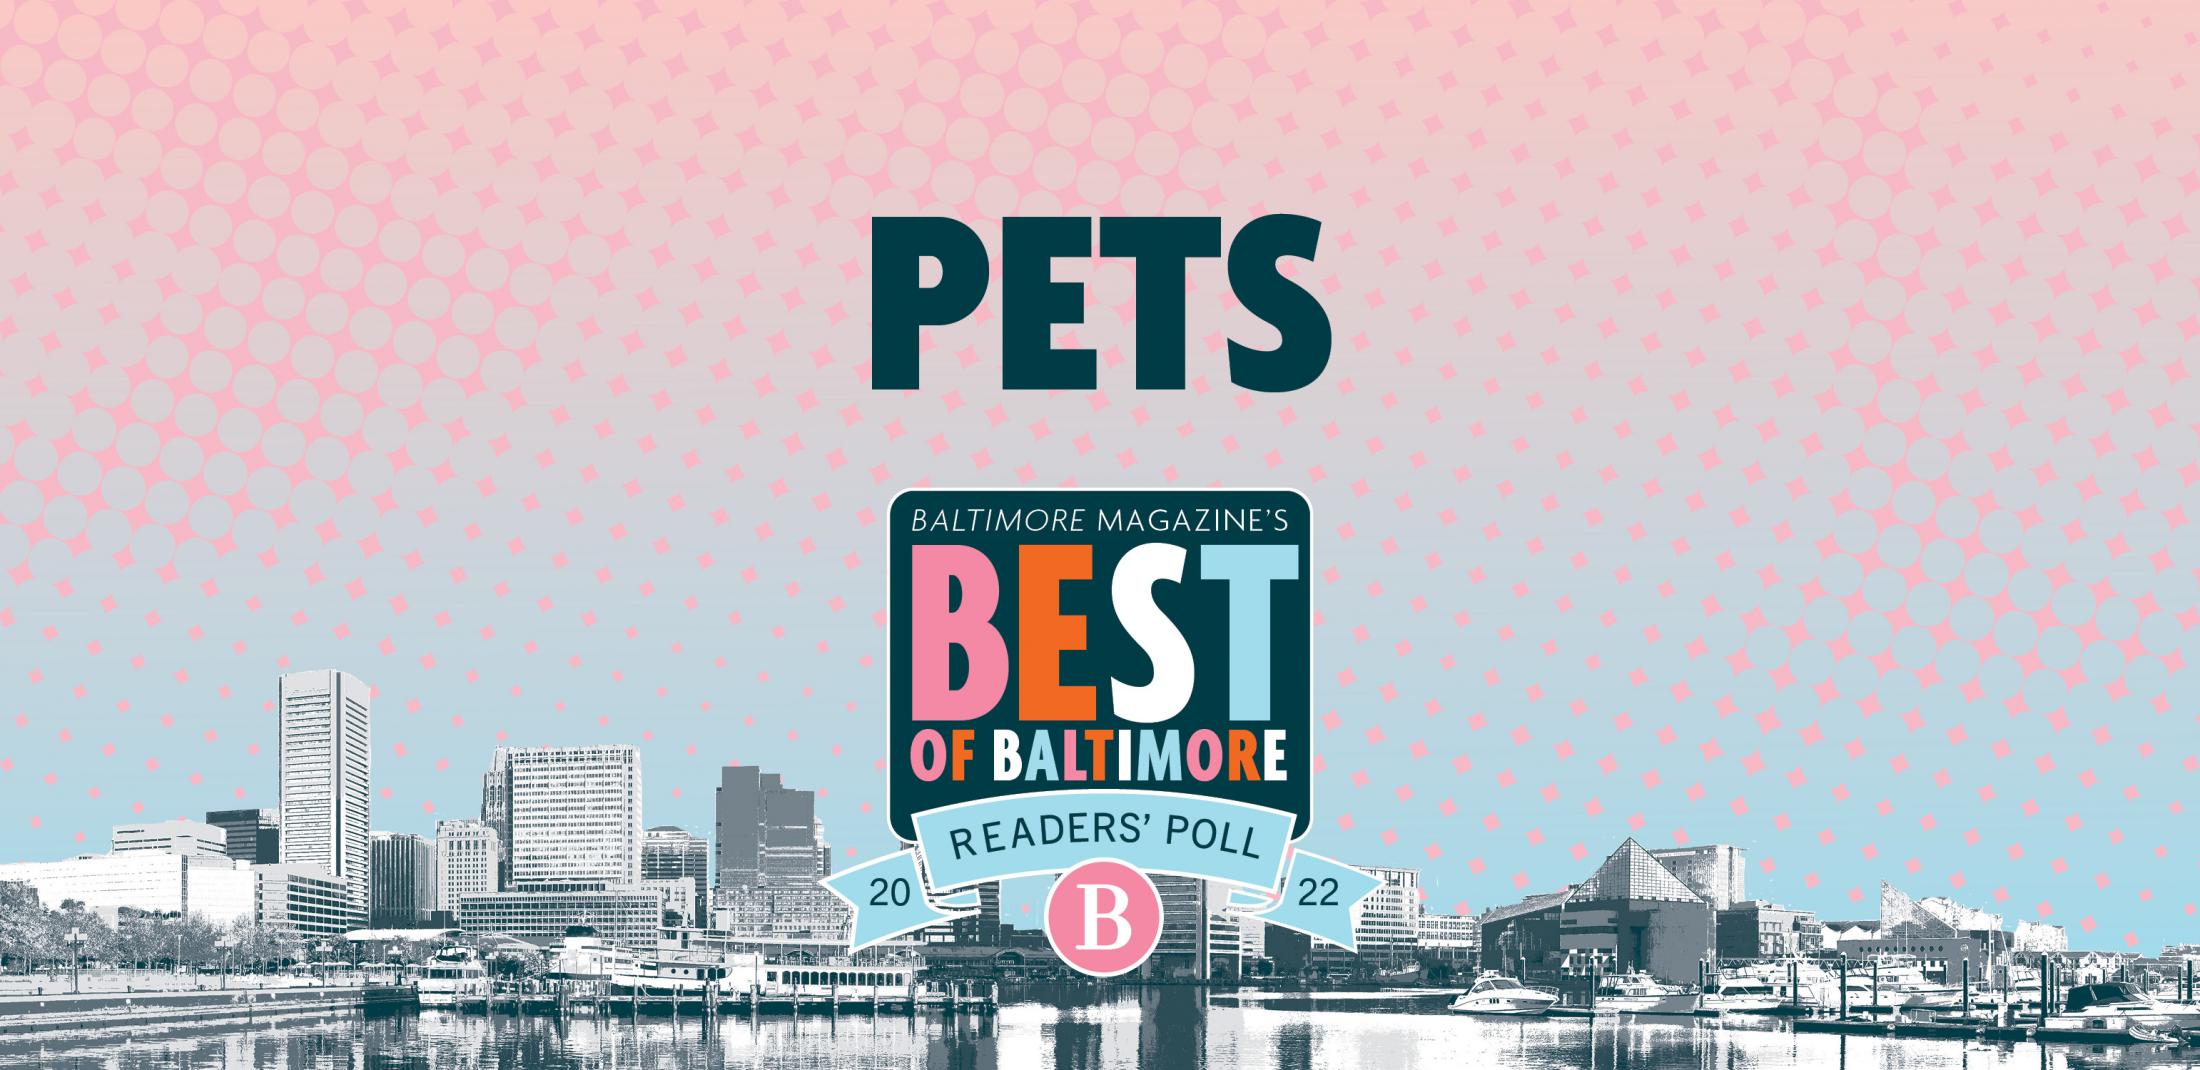 Best of Baltimore Readers’ Poll Results 2022 Pets